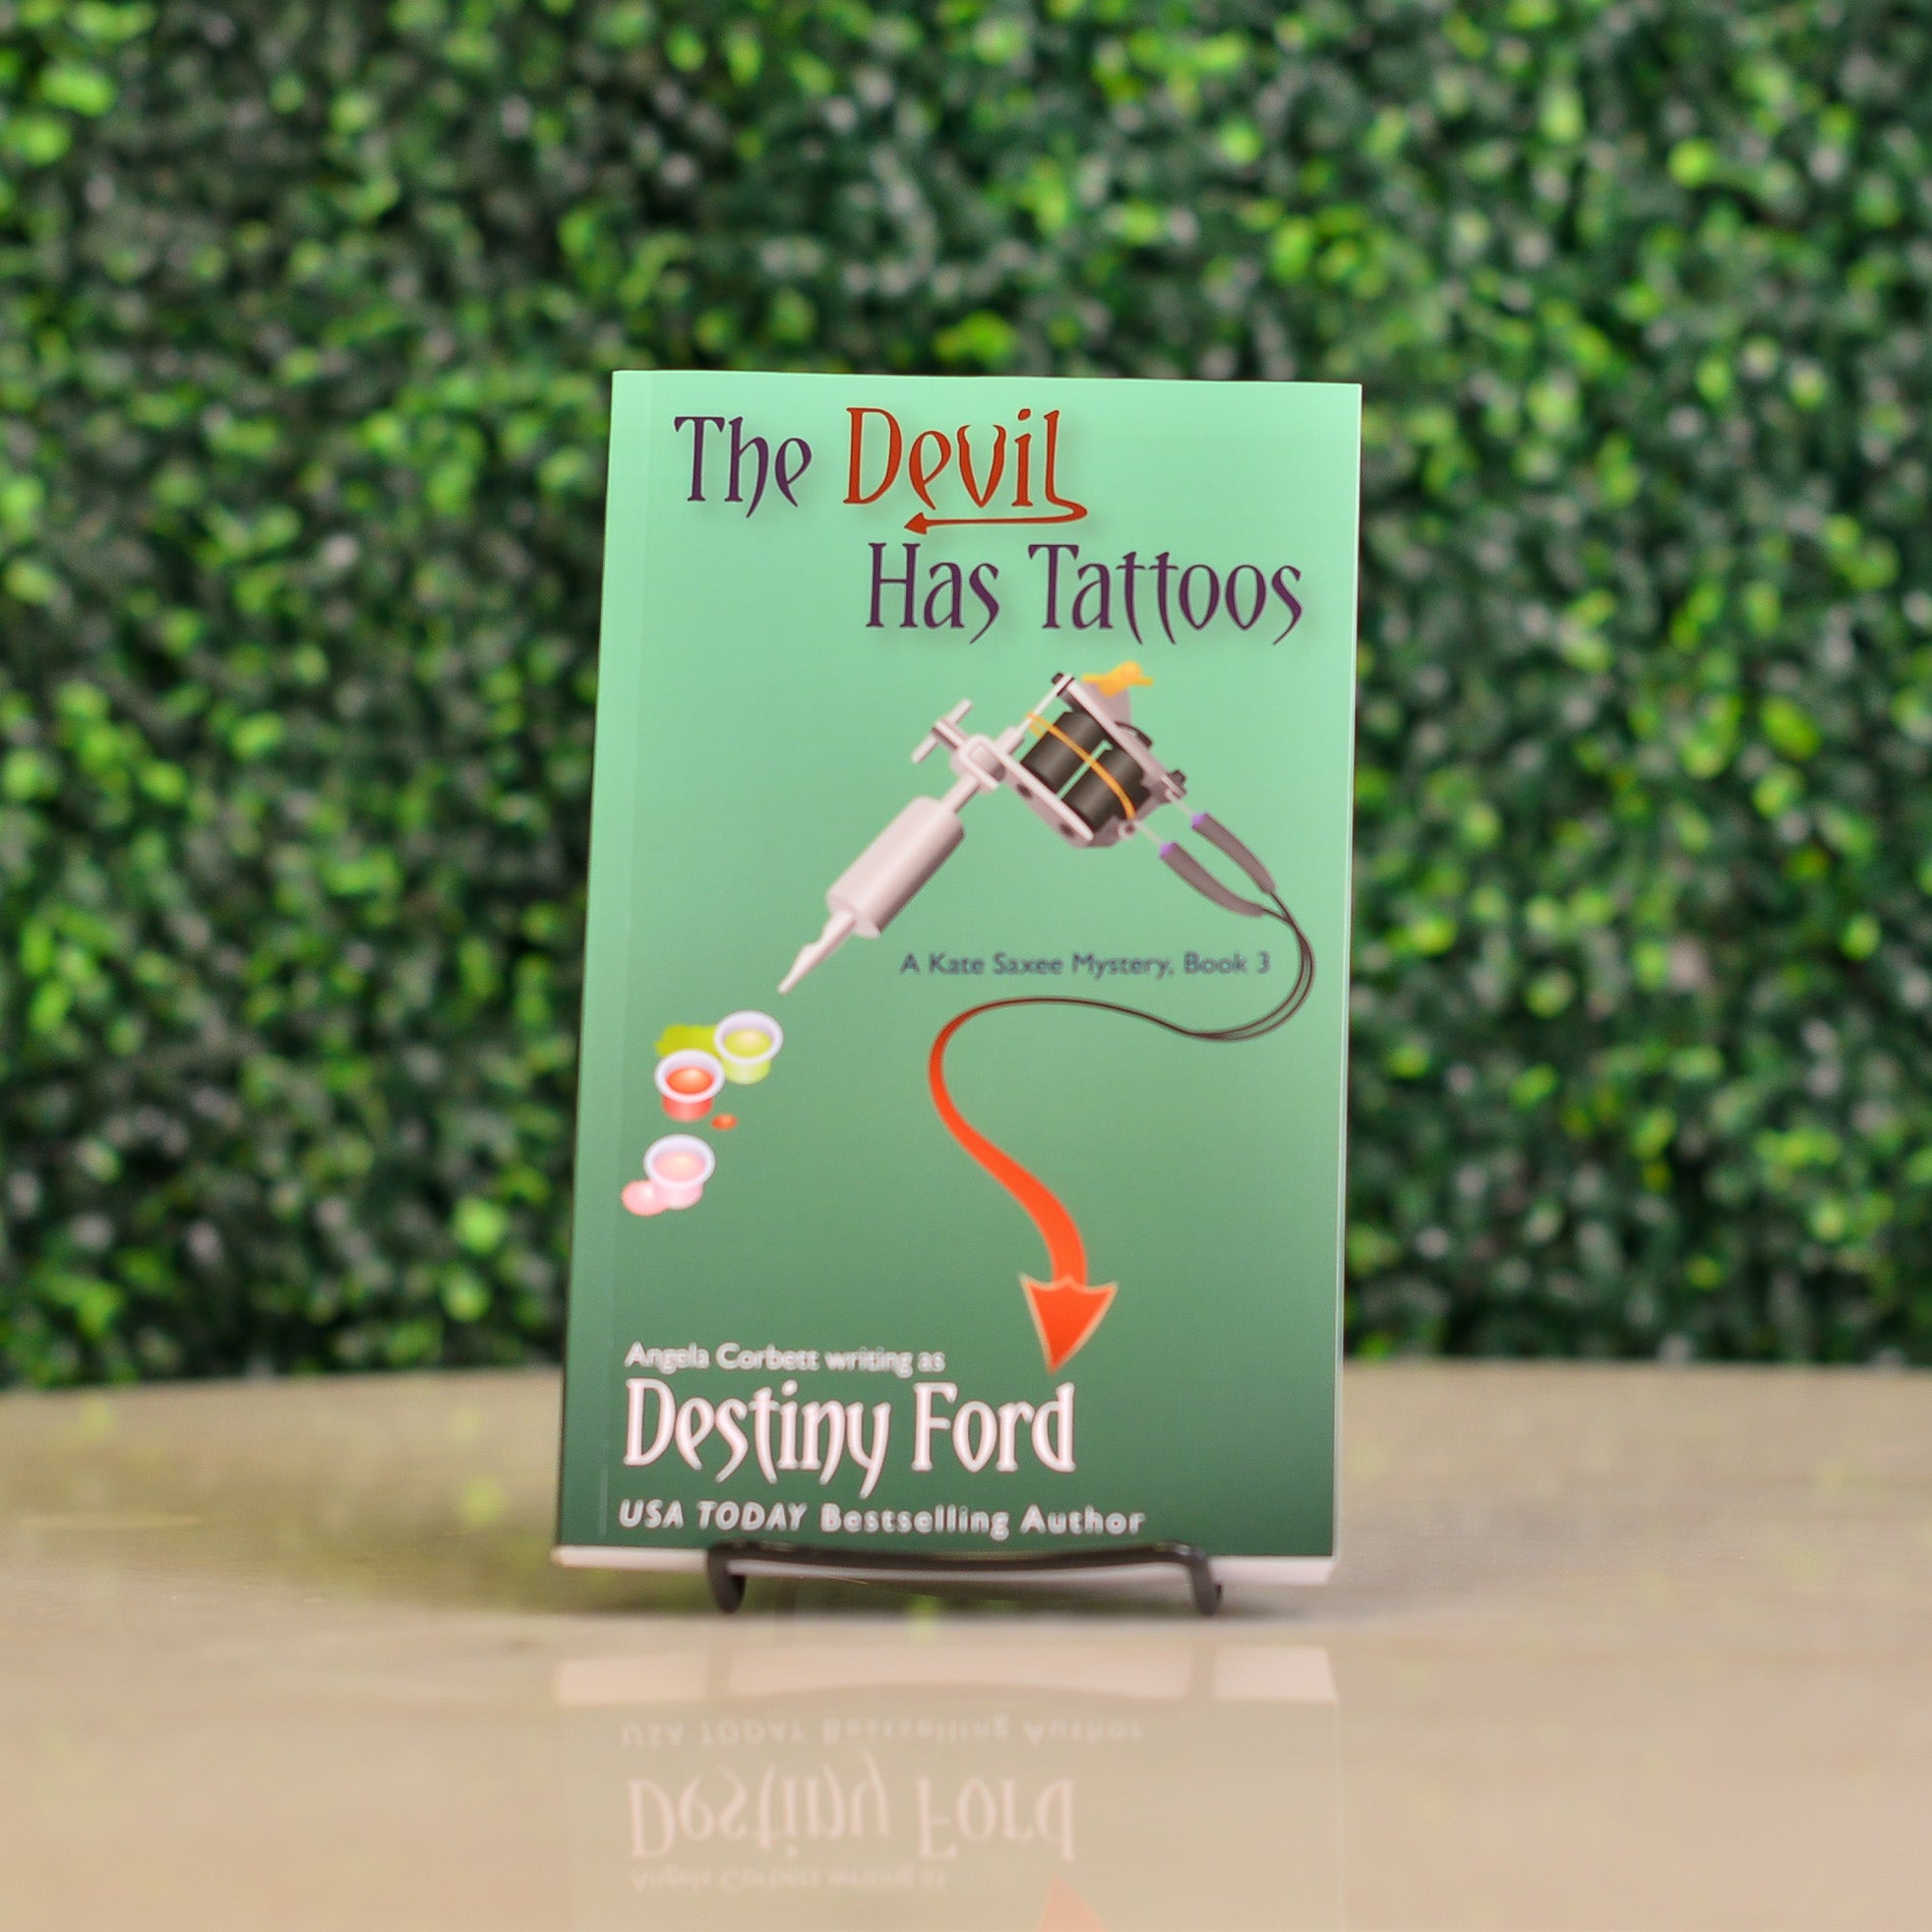 The Devil Has Tattoos, A Kate Saxee Mystery Series (Book 3)